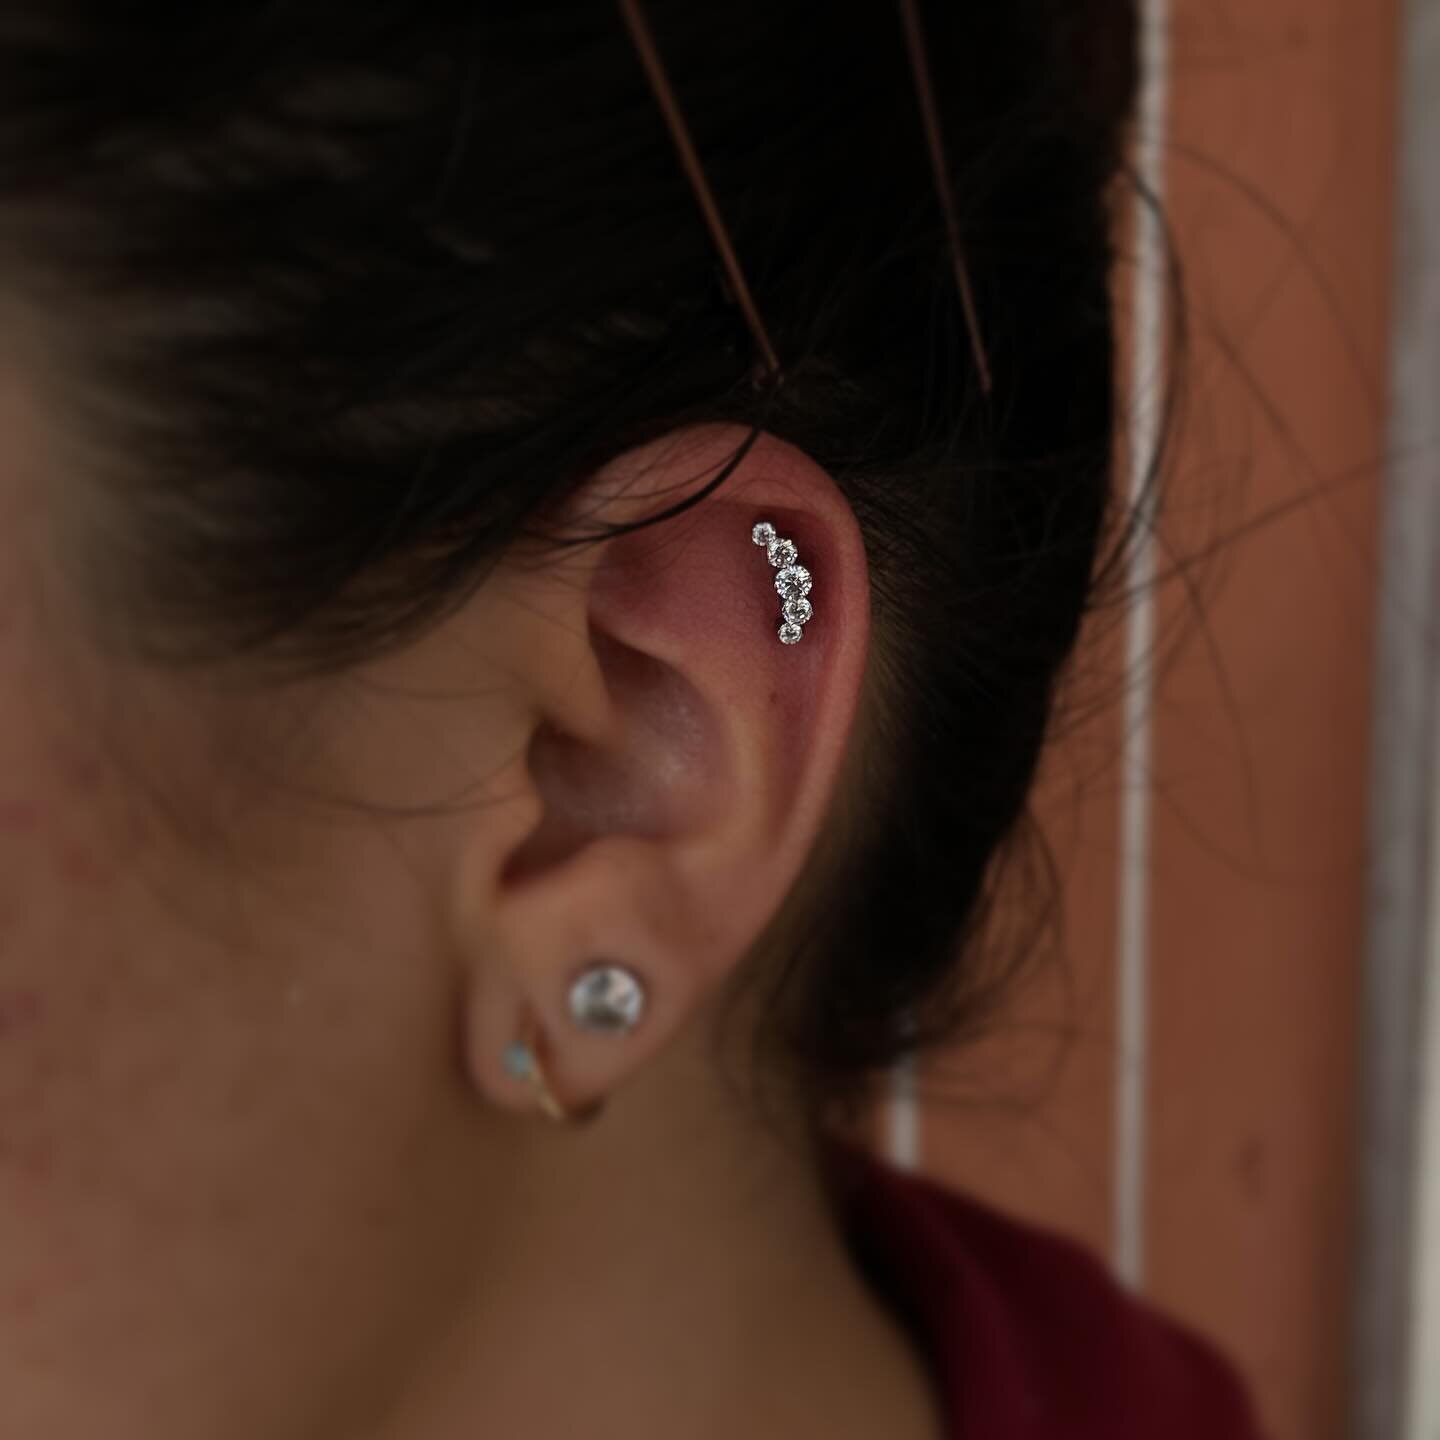 Super cute helix piercing from yesterday rockin a F-136 titanium Odyssy Prium from @industrialstrength